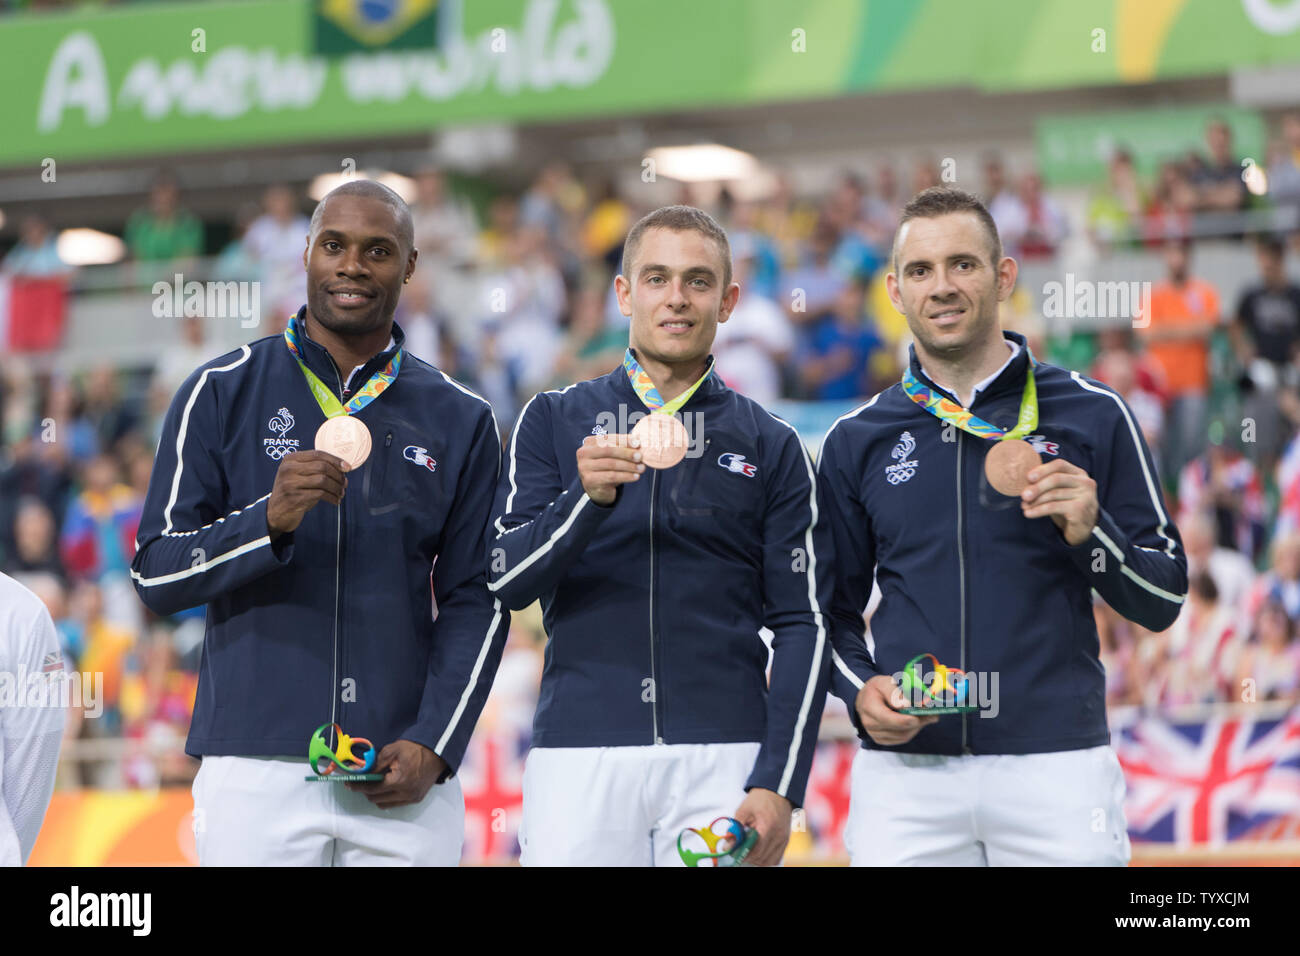 Cyclists Gregory Bauge, Michael D'Almeida and Francois Pervis of France show their Bronze medals following the presentation ceremony for the Men's Team Sprint Finals at the Rio Olympic Velodrome during the 2016 Summer Olympics in Rio de Janeiro, Brazil, on August 11, 2016. France won the bronze, New Zealand the silver and Great Britain the gold.   Photo by Richard Ellis/UPI Stock Photo